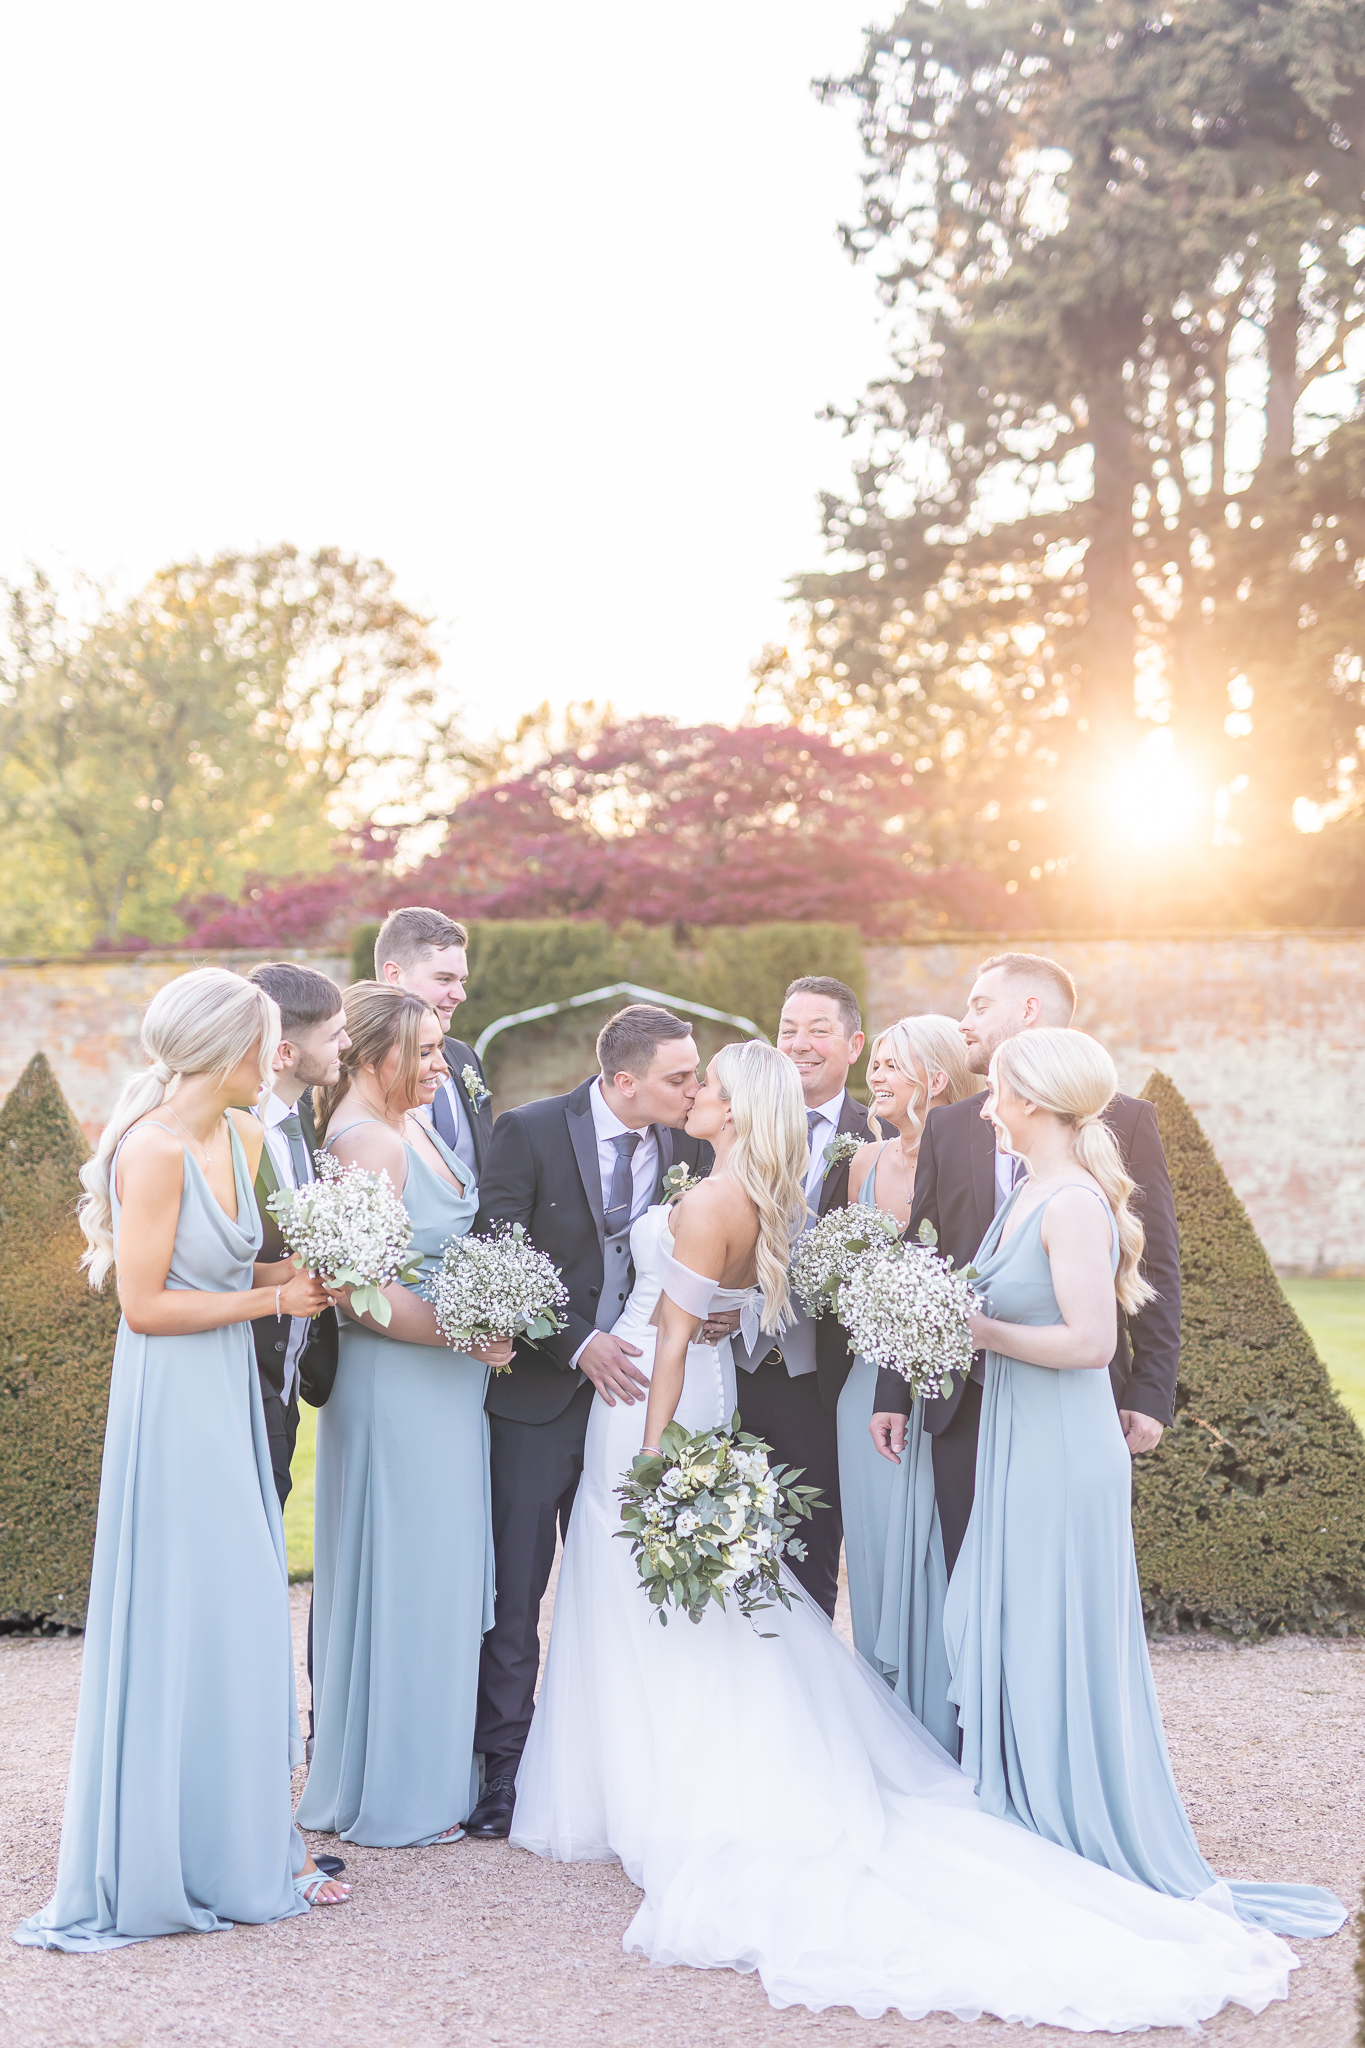 Bride and groom sharing a kiss surrounded by friends and family during sunset at Combermere Abbey in Cheshire